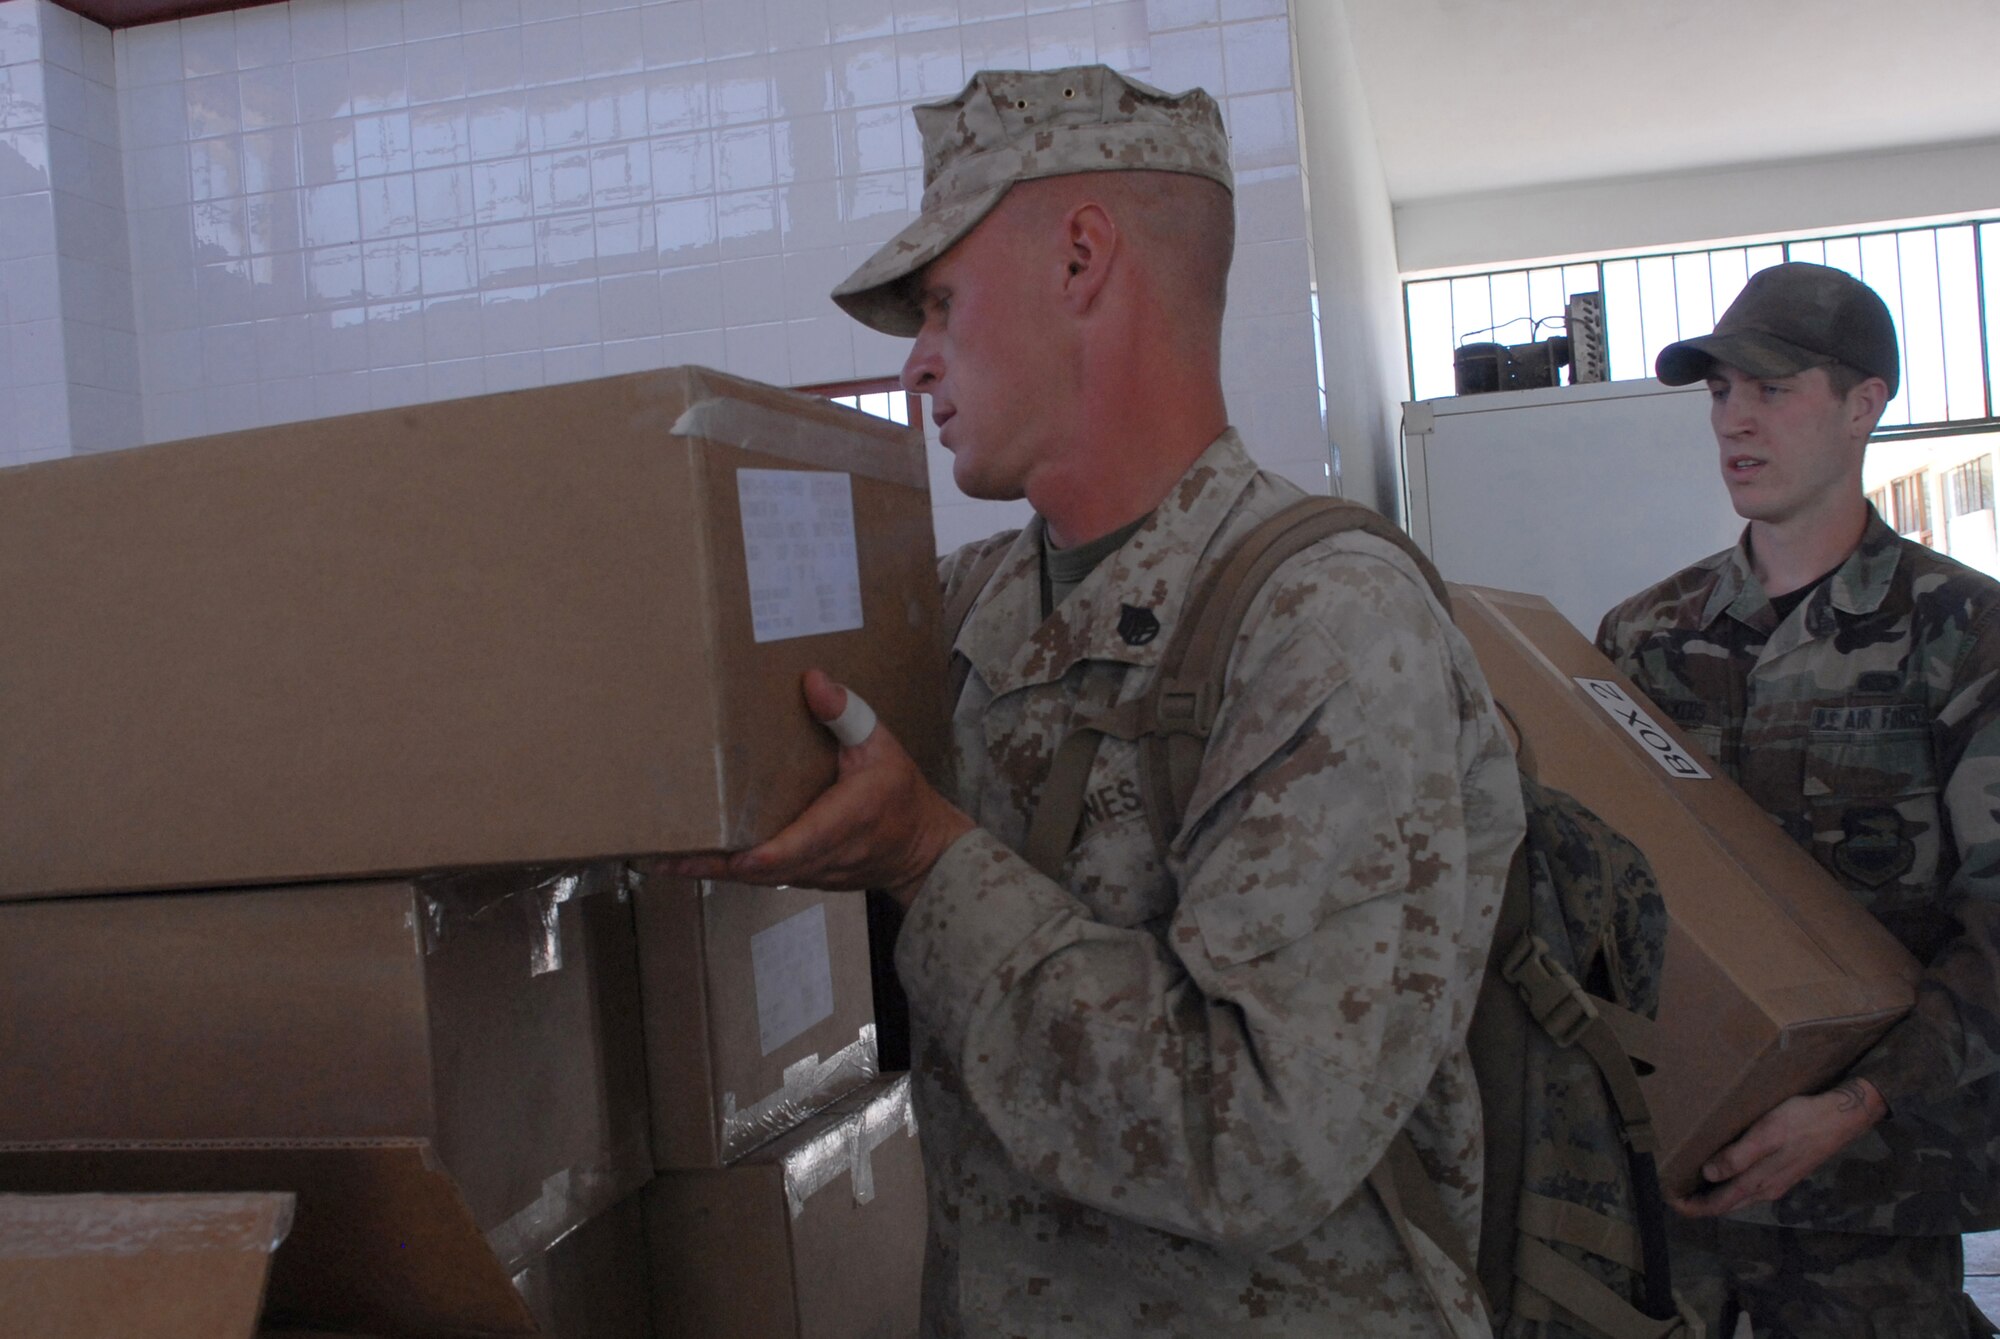 U.S. Marine Staff Sgt. Todd Bowers, a civil affairs specialist with the 4th Civil Affairs Group at Anacostia Naval Annex, District of Columbia, delivers food donated by the U.S. military, June 9, to Juan Andres Vivanco Amorin, a children’s orphanage in Ayacucho, Peru. The orphanage houses 180 boys and girls who will be affected by the support given to New Horizons - Peru 2008, a Peruvian and U.S. partnered effort to build schools, clinics, and wells for the Peruvian people. (U.S. Air Force photo/Airman 1st Class Tracie Forte)